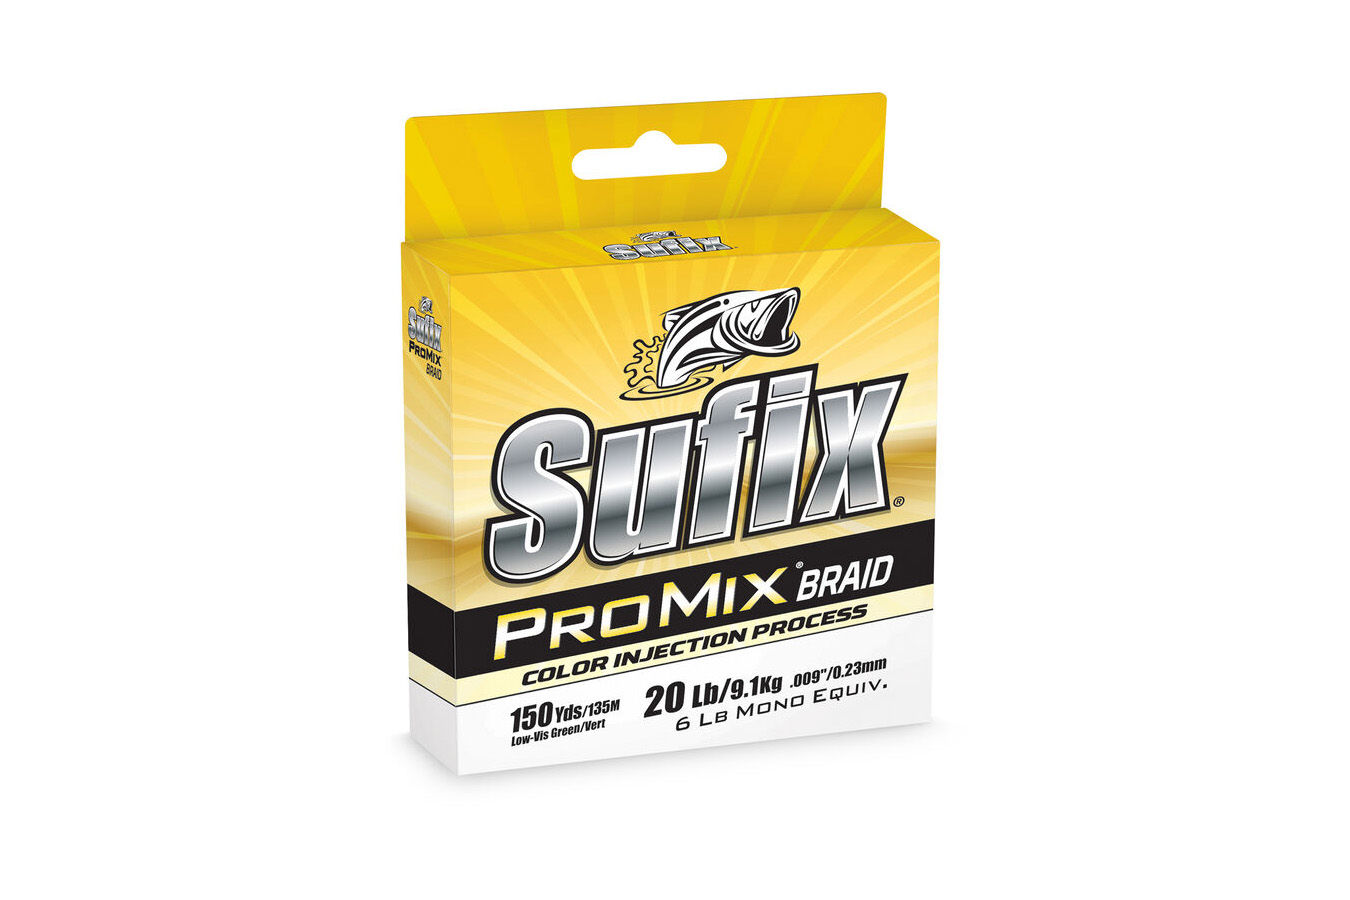 Discount Sufix ProMix Braid Fishing Line for Sale, Online Fishing Store